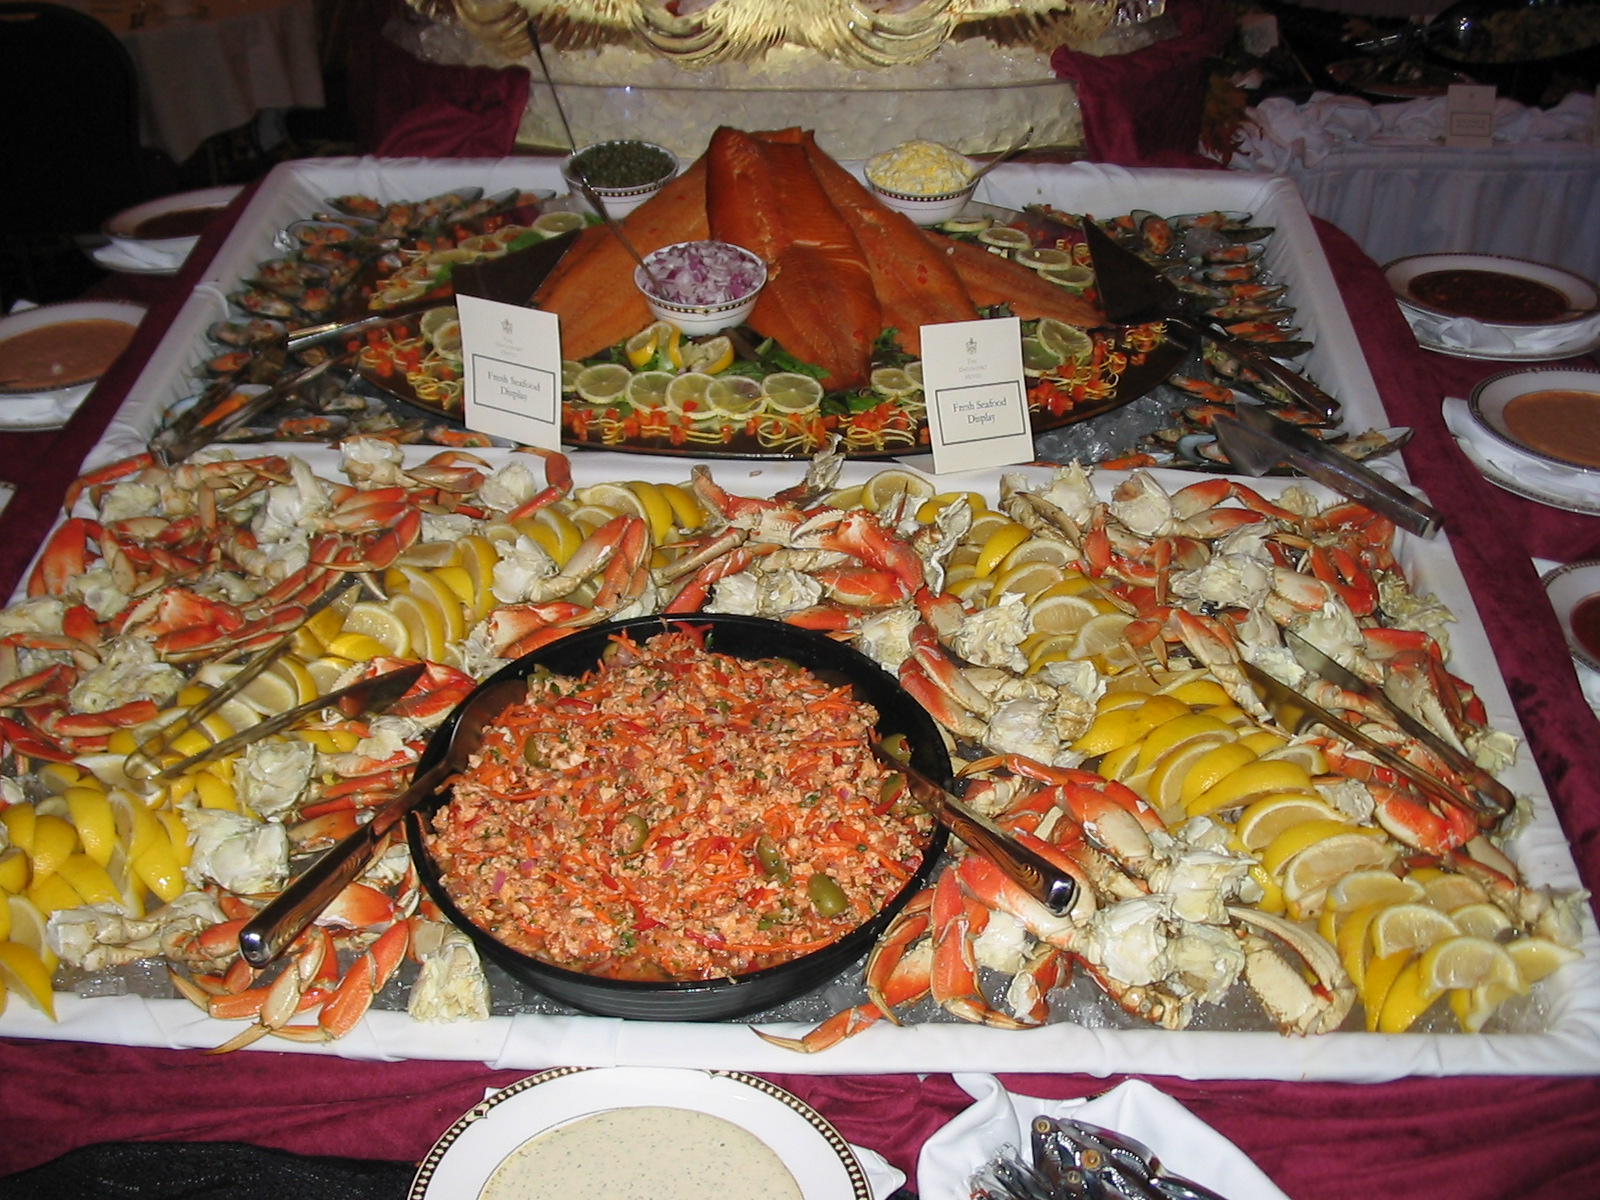 the buffet spread is full of many seafood, seafood dishes and dips